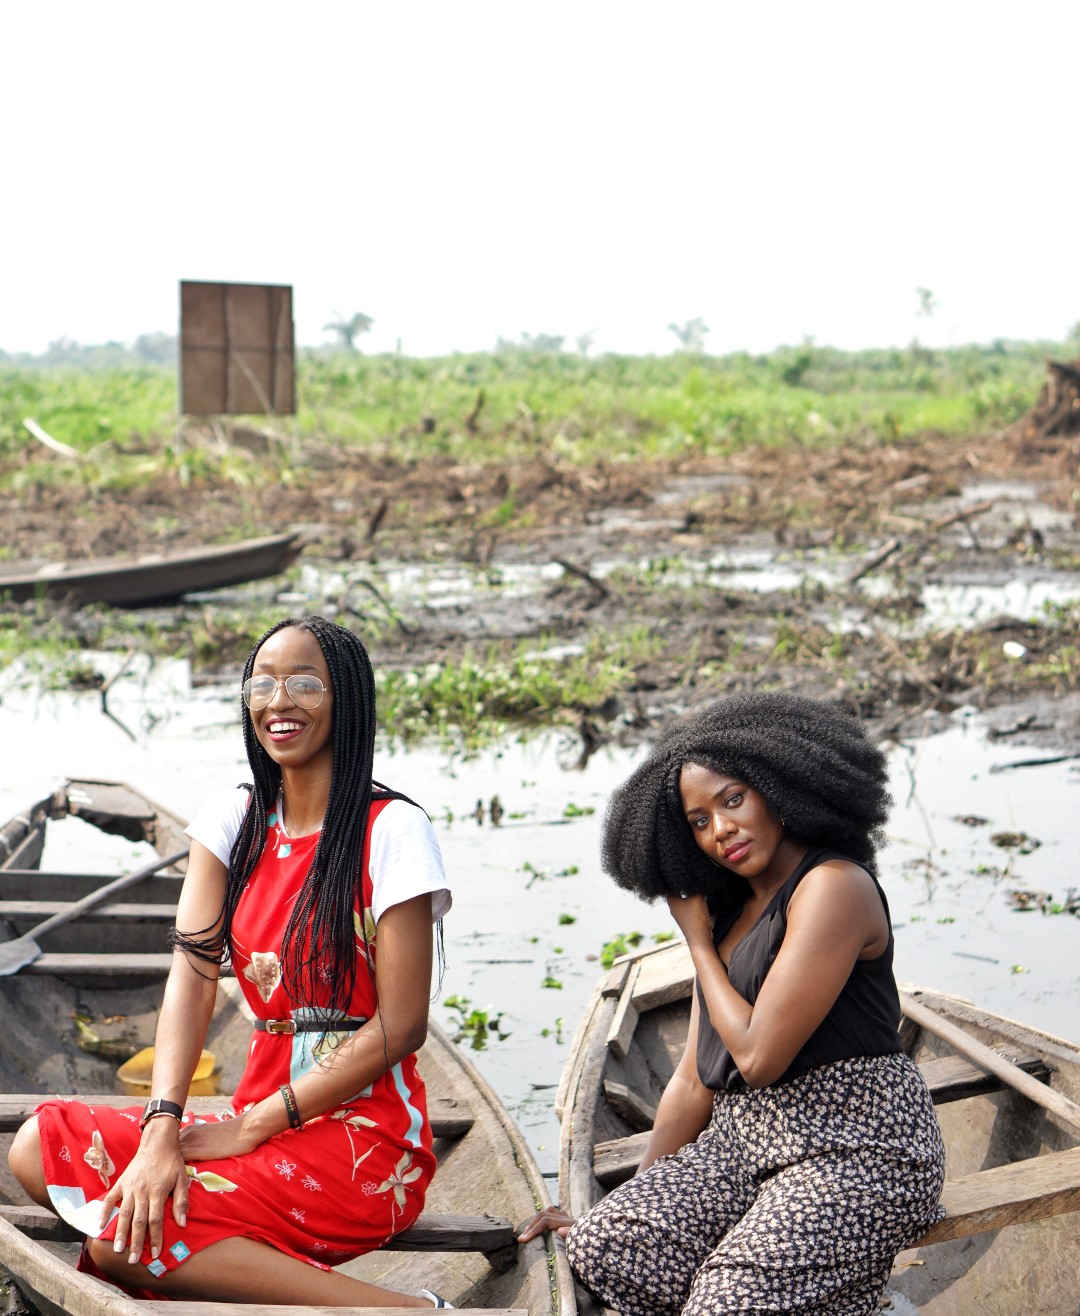 Nigerian bloggers Cassie Daves And Nappyhaired at the Epe Mangrove